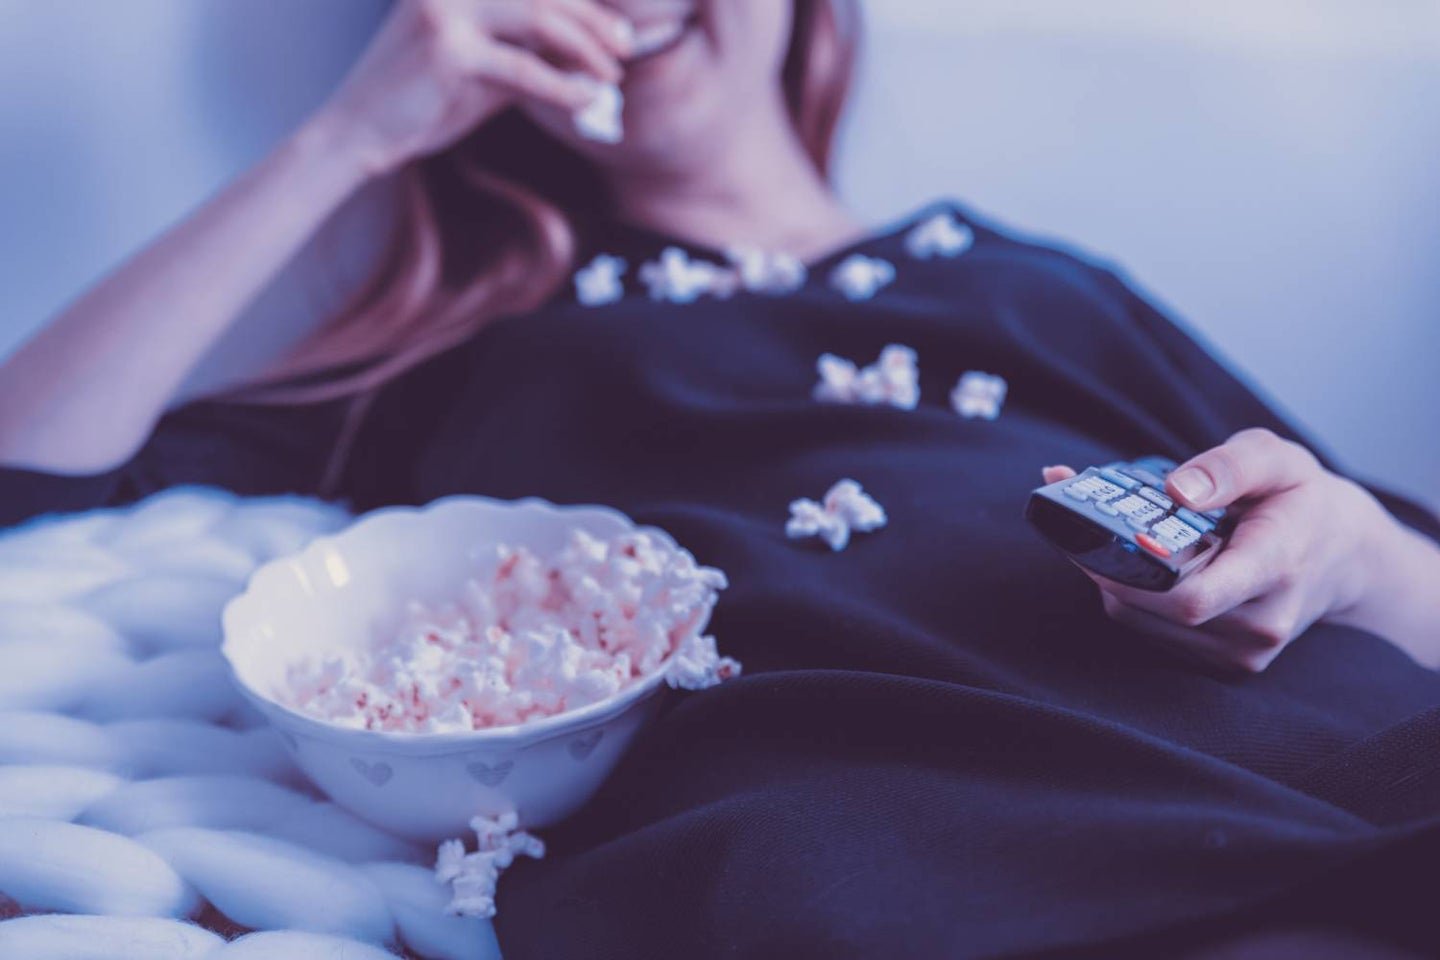 11 totally legal streaming platforms that will let you watch movies for free